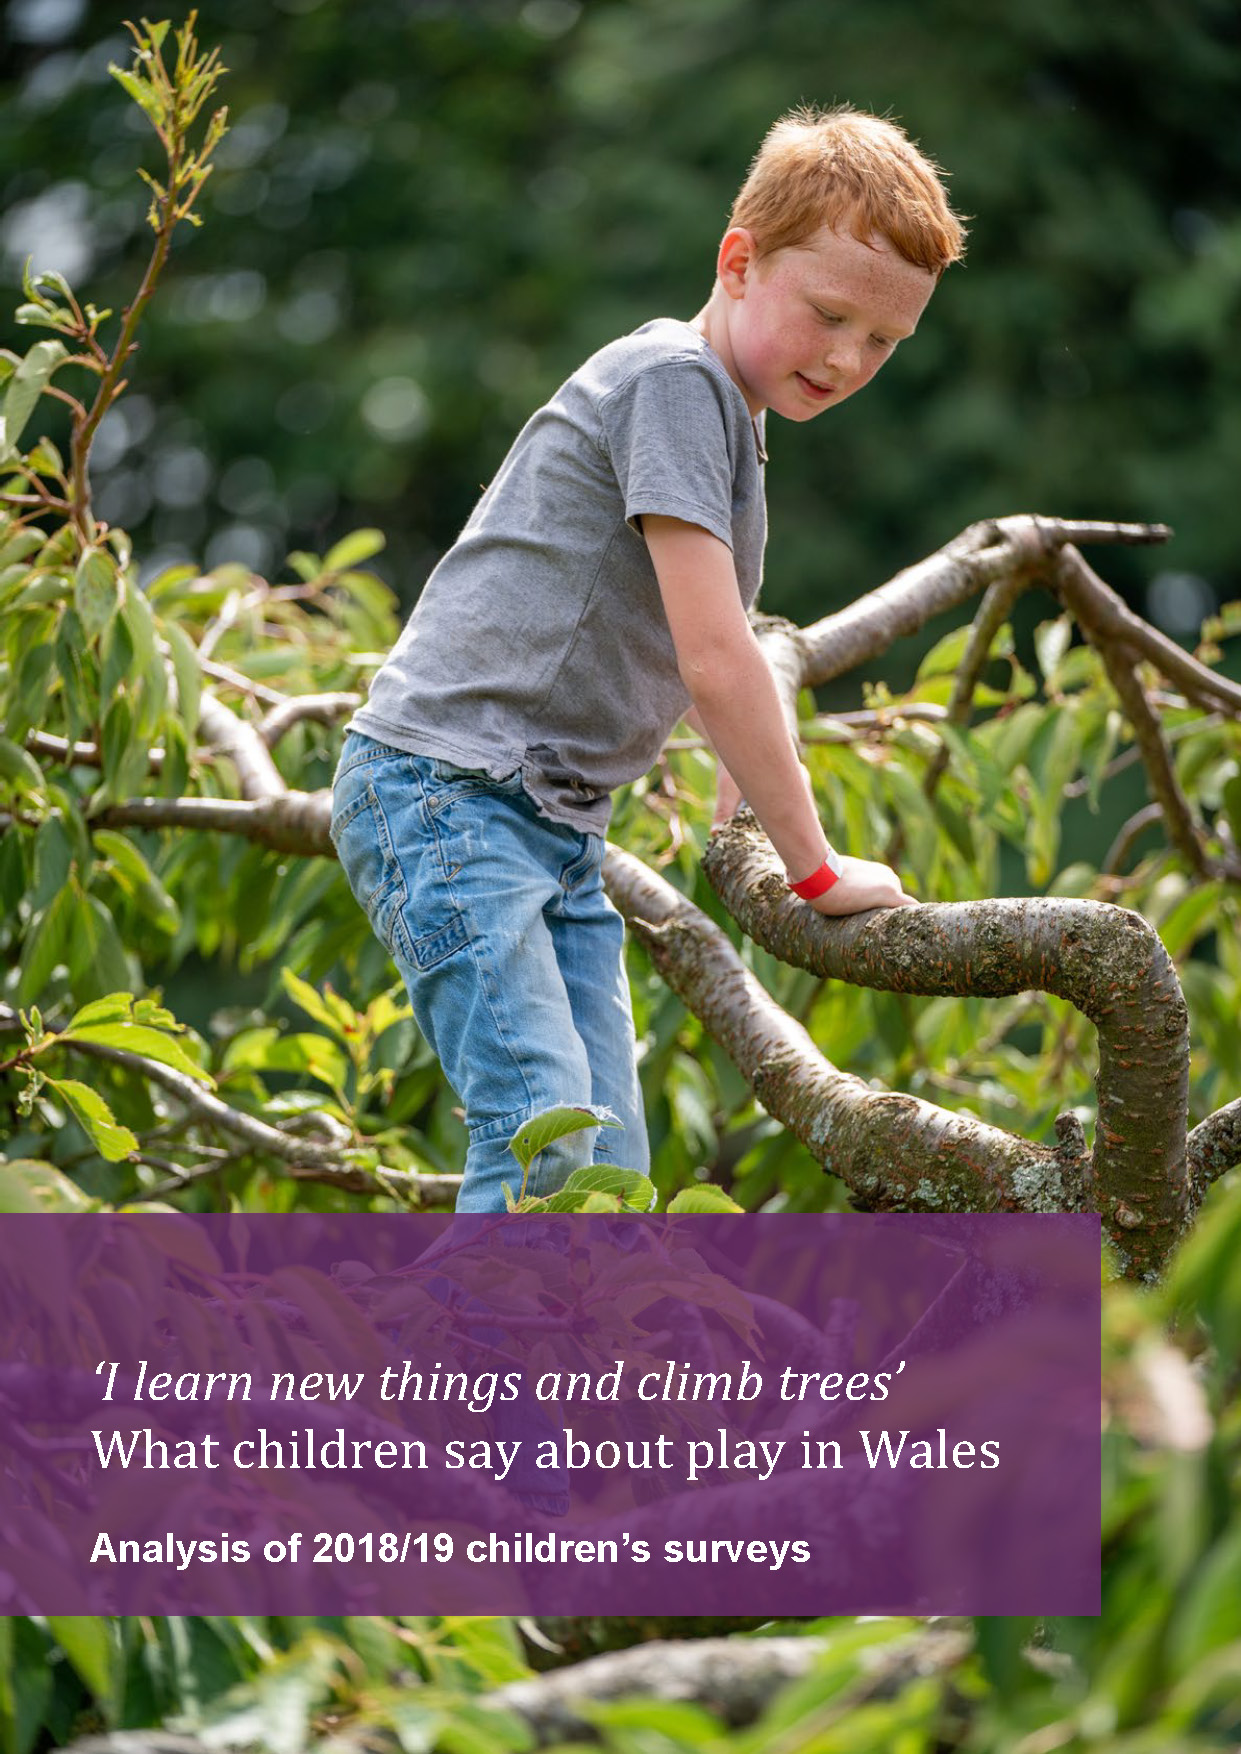 What children say about play in Wales